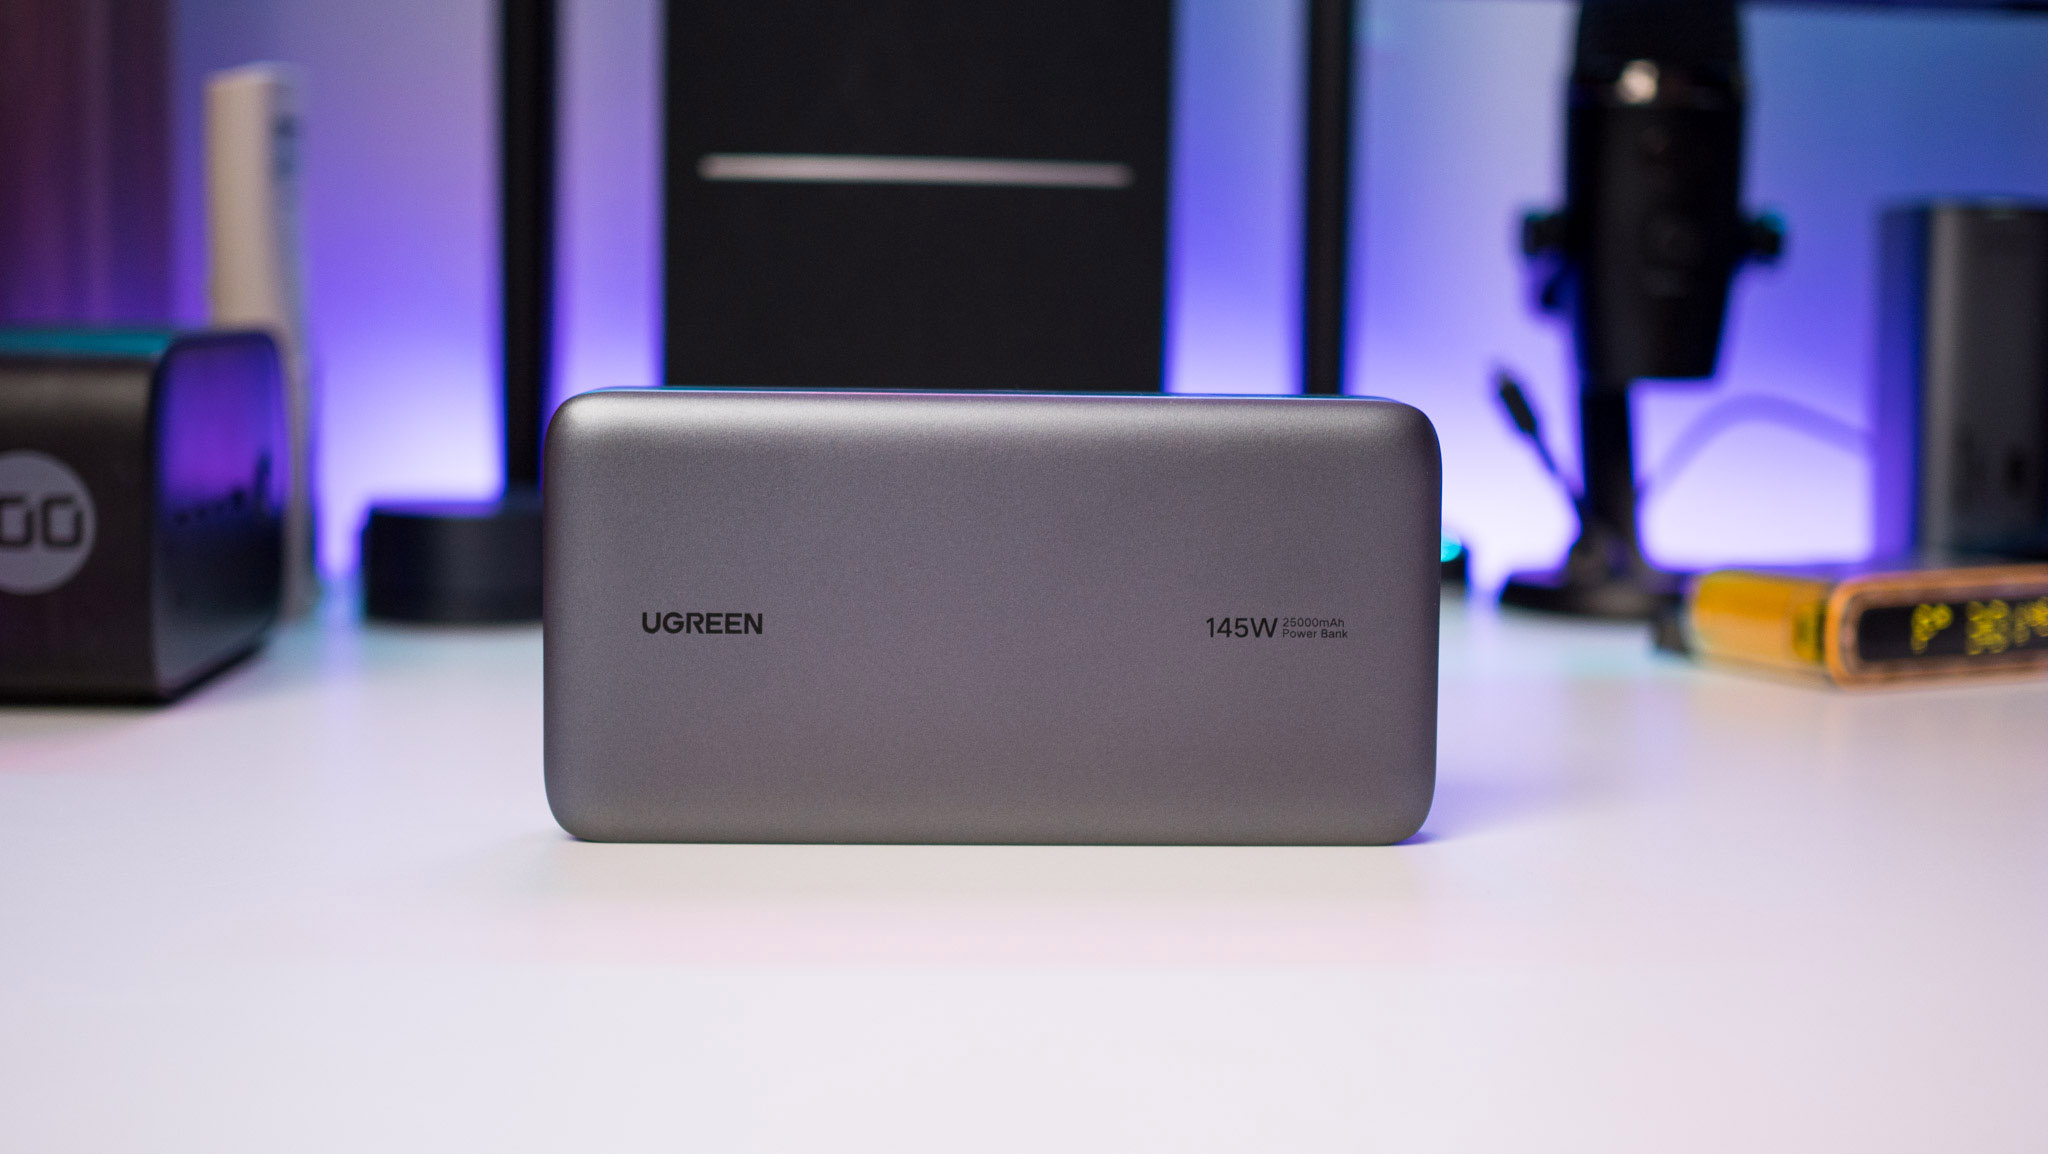 UGREEN's 145W fast charging power bank was a lifesaver during my long trip